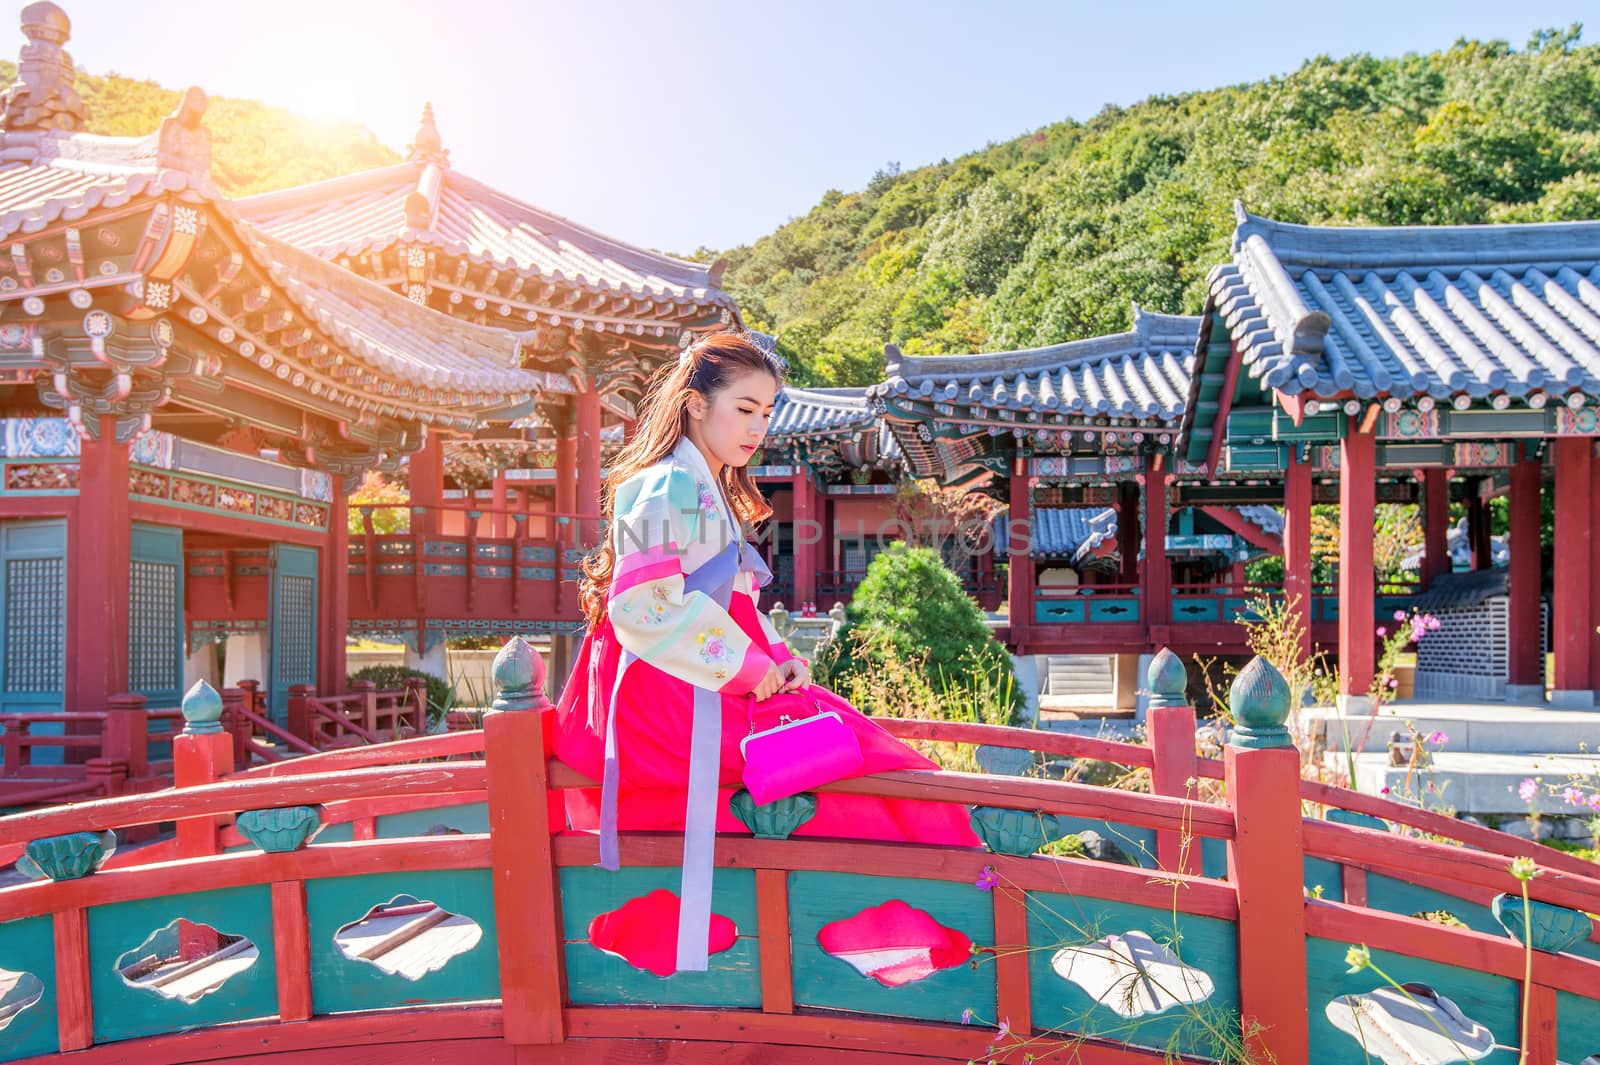 Woman with Hanbok in Gyeongbokgung,the traditional Korean dress. by gutarphotoghaphy